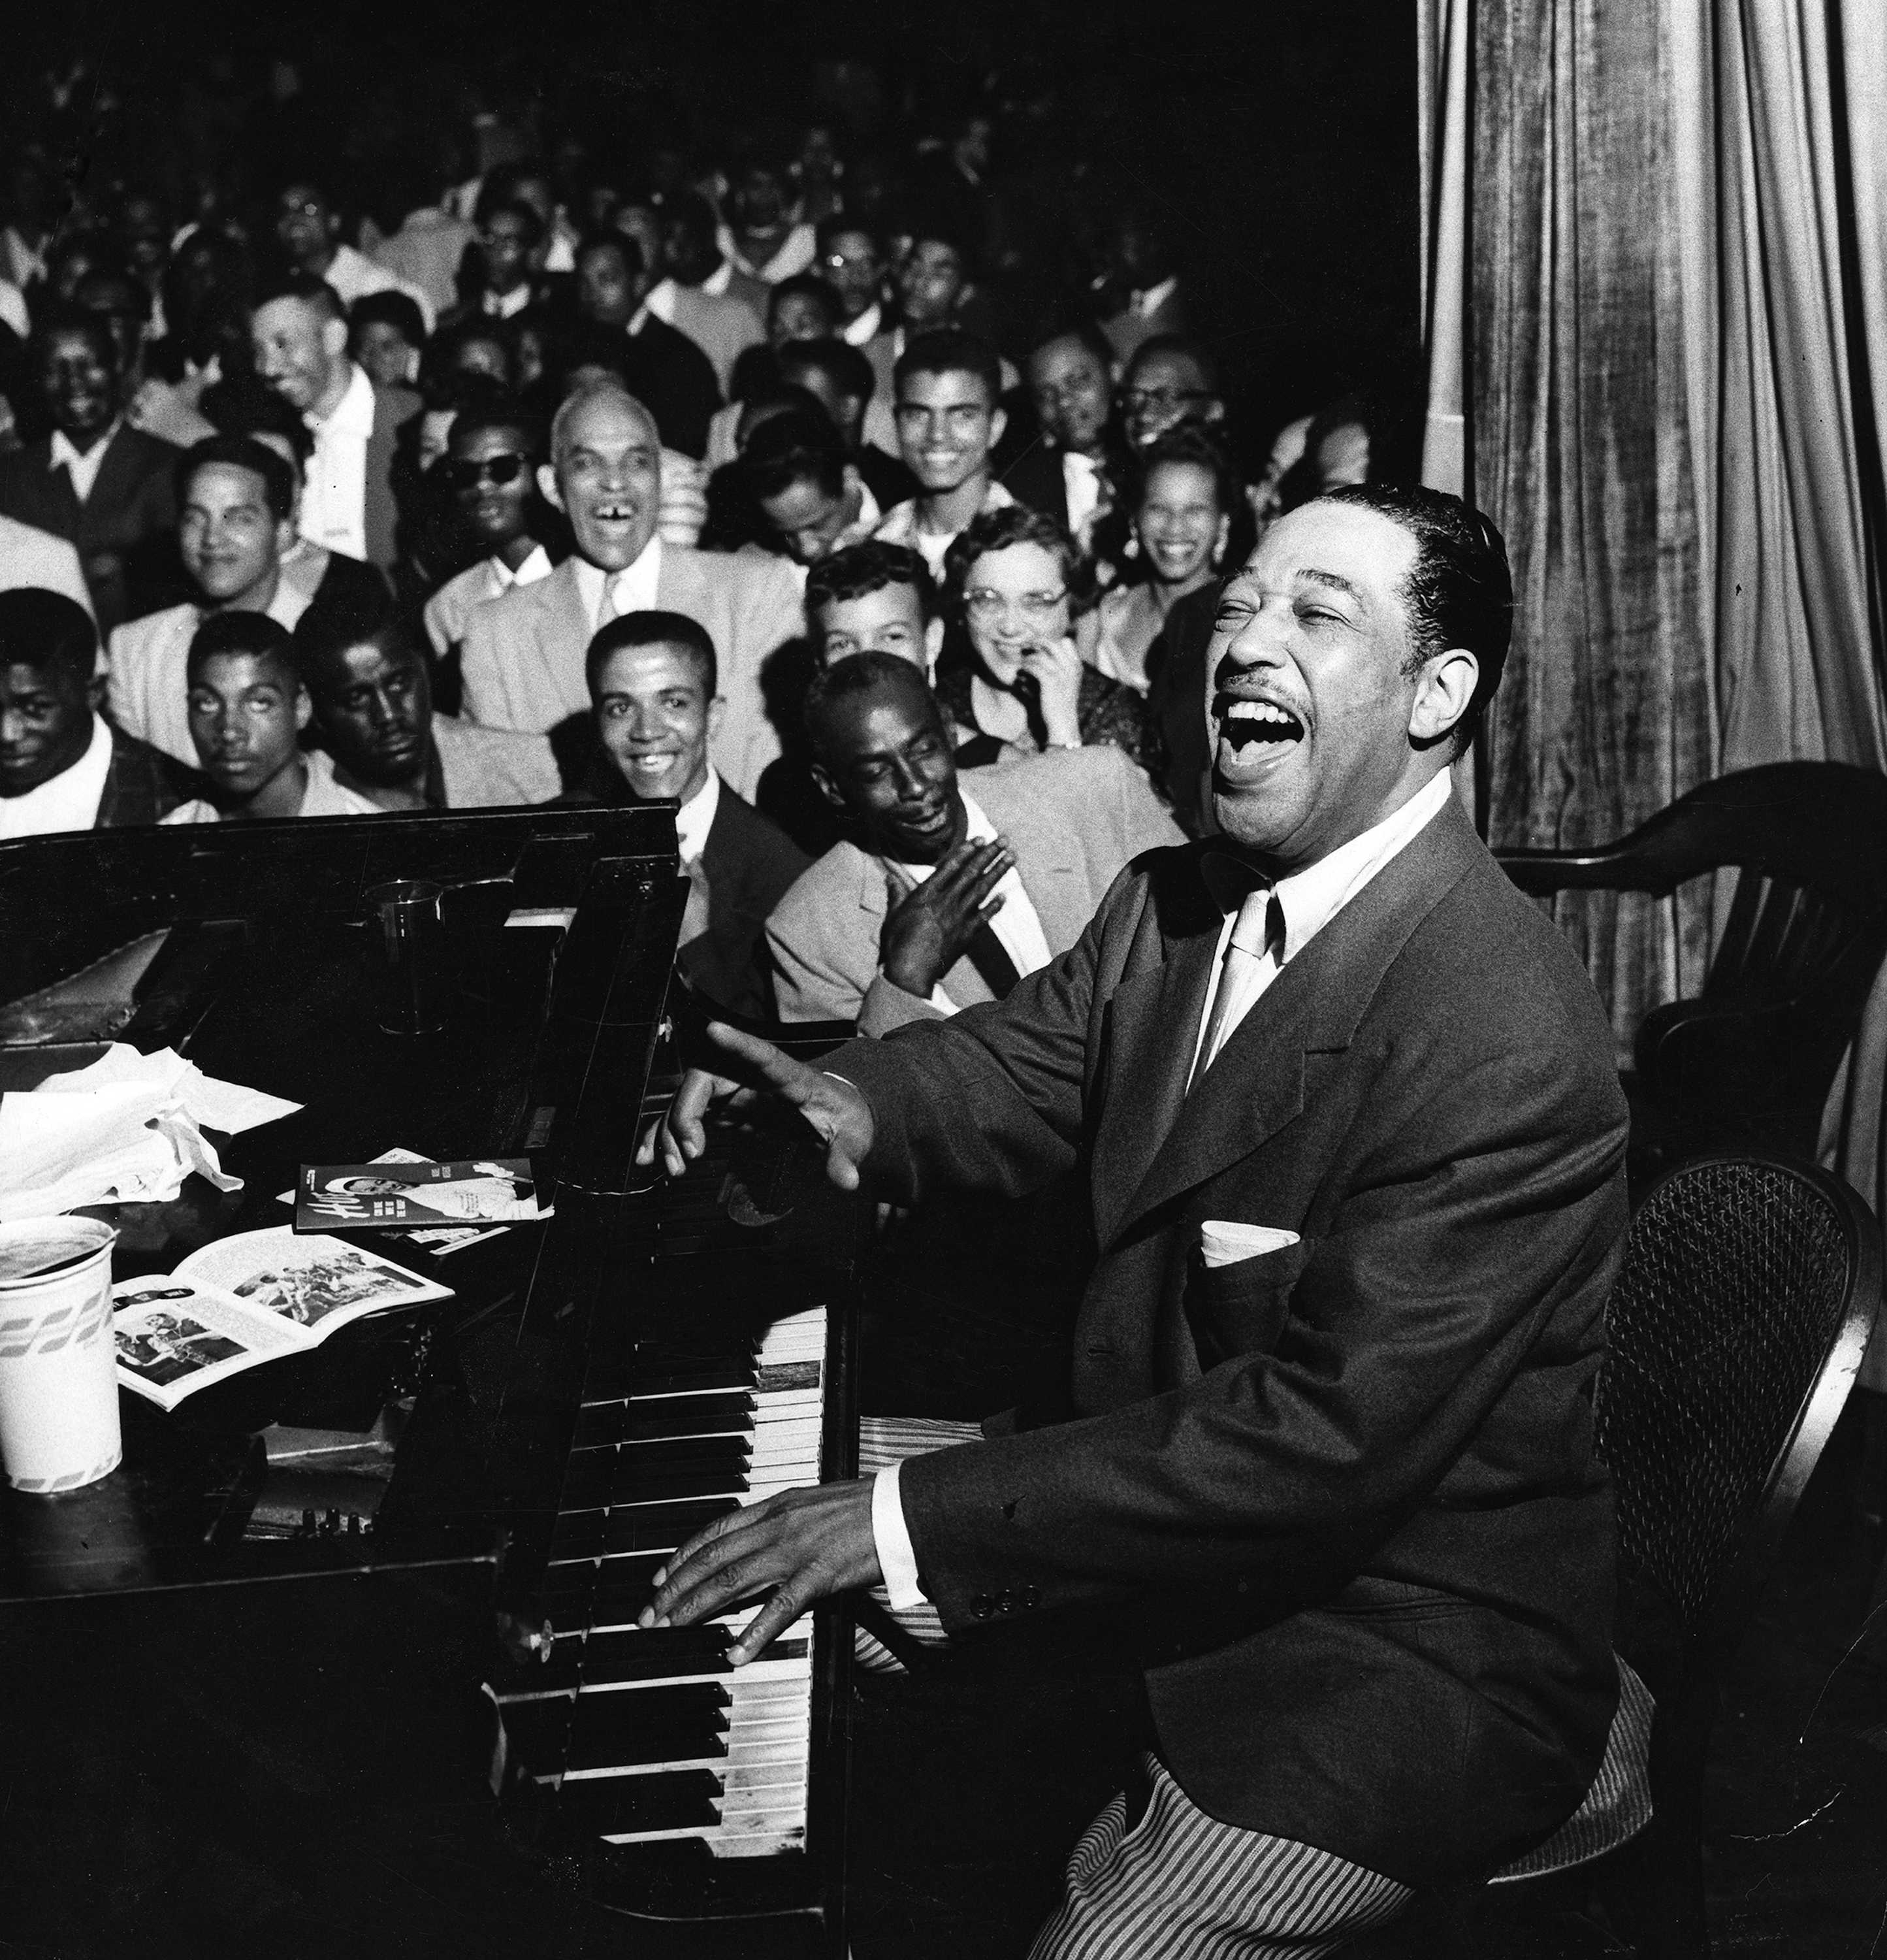 Black and white photograph of Duke Ellington sitting at a piano in front of a crowd